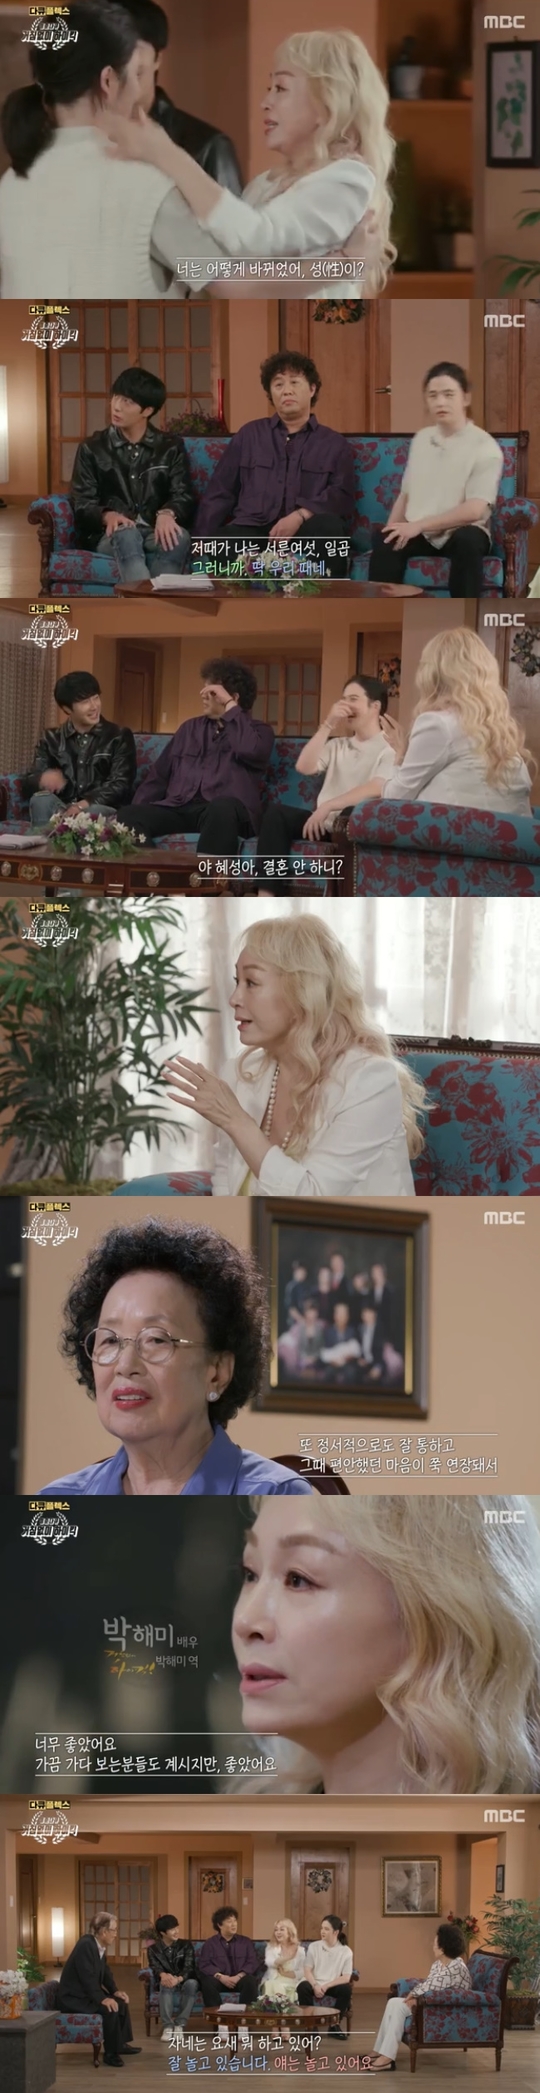 Kim Hye-seong has revealed the recent transformation into a long-haired one.MBCs Documentary Flex Youth Documentary - Unreservedly High Kick, which was broadcast on October 29, revealed the high Kick Actors who gathered in one place in 15 years.Jung Il-woo, who played the role of Lee Yoon-ho, appeared in the set of the house restored in 15 years. Jung Il-woo said, My memories that I forgot rose.It has been 15 years since then, but there was also this concern that the public and fans would still be curious. I cried in fact on the last day of recording the set High Kick without hesitation.I was very sick to think that I could not come back here and now it would be a memory for me, but it came in almost 15 years and it seems strange because it is almost the same.I am old. Kim Hye-seong, who played Lee Min-ho, was also surprised to see the set that reproduced the atmosphere at the time, saying, It is strange, almost the same.Jung Il-woo, Kim Hye-seong, who was twenty to thirty-five years old, and Jeong Jun-ha, who came out as a good father, said, I am really the same.Comet had grown up. He was a full-grown baby. Jung Il-woo seemed to have become a wildling.Minho was a little crooked, Jeong Jun-ha said, I am not a natural person. Thats when Park Hae-mi, who came out as the mother of Jung Il-woo and Kim Hye-seong, appeared.Park Hae-mi, who greeted each person with a good greeting, looked at Kim Hye-seong, who was long-haired, and said, I have a daughter. How did the sex change?When they were older, Park Hae-mi was surprised to hear, What the hell, old bachelors?Lee Soon-jae and Na Moon-hee came in on the set afterwards.Lee Soon-jae said, It is good to meet you for a long time, and I still have a lot of good old thoughts because I am still alive.I met him in fifteen years, but he was as good and emotional as the person I met yesterday, and I was relaxed at that time, Na Moon-hee said.Park Hae-mi also said, It was so good. Some people went there sometimes, but it was good. Suddenly, I feel like it.